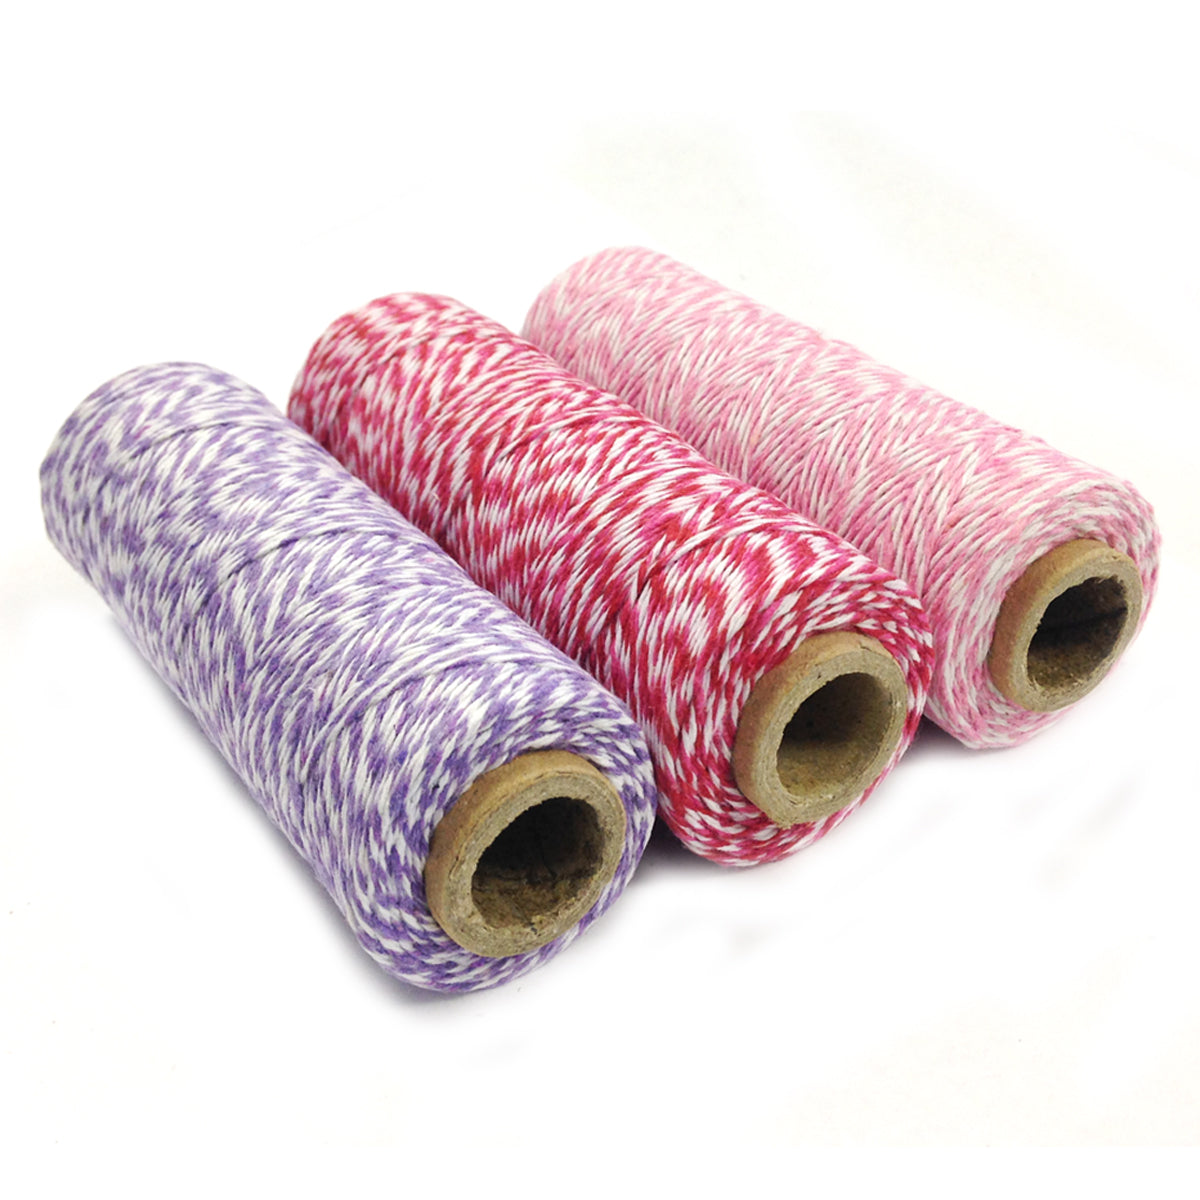 Wrapables Cotton Baker's Twine 4ply 330 Yards (Set of 3 Spools x 110 Yards)